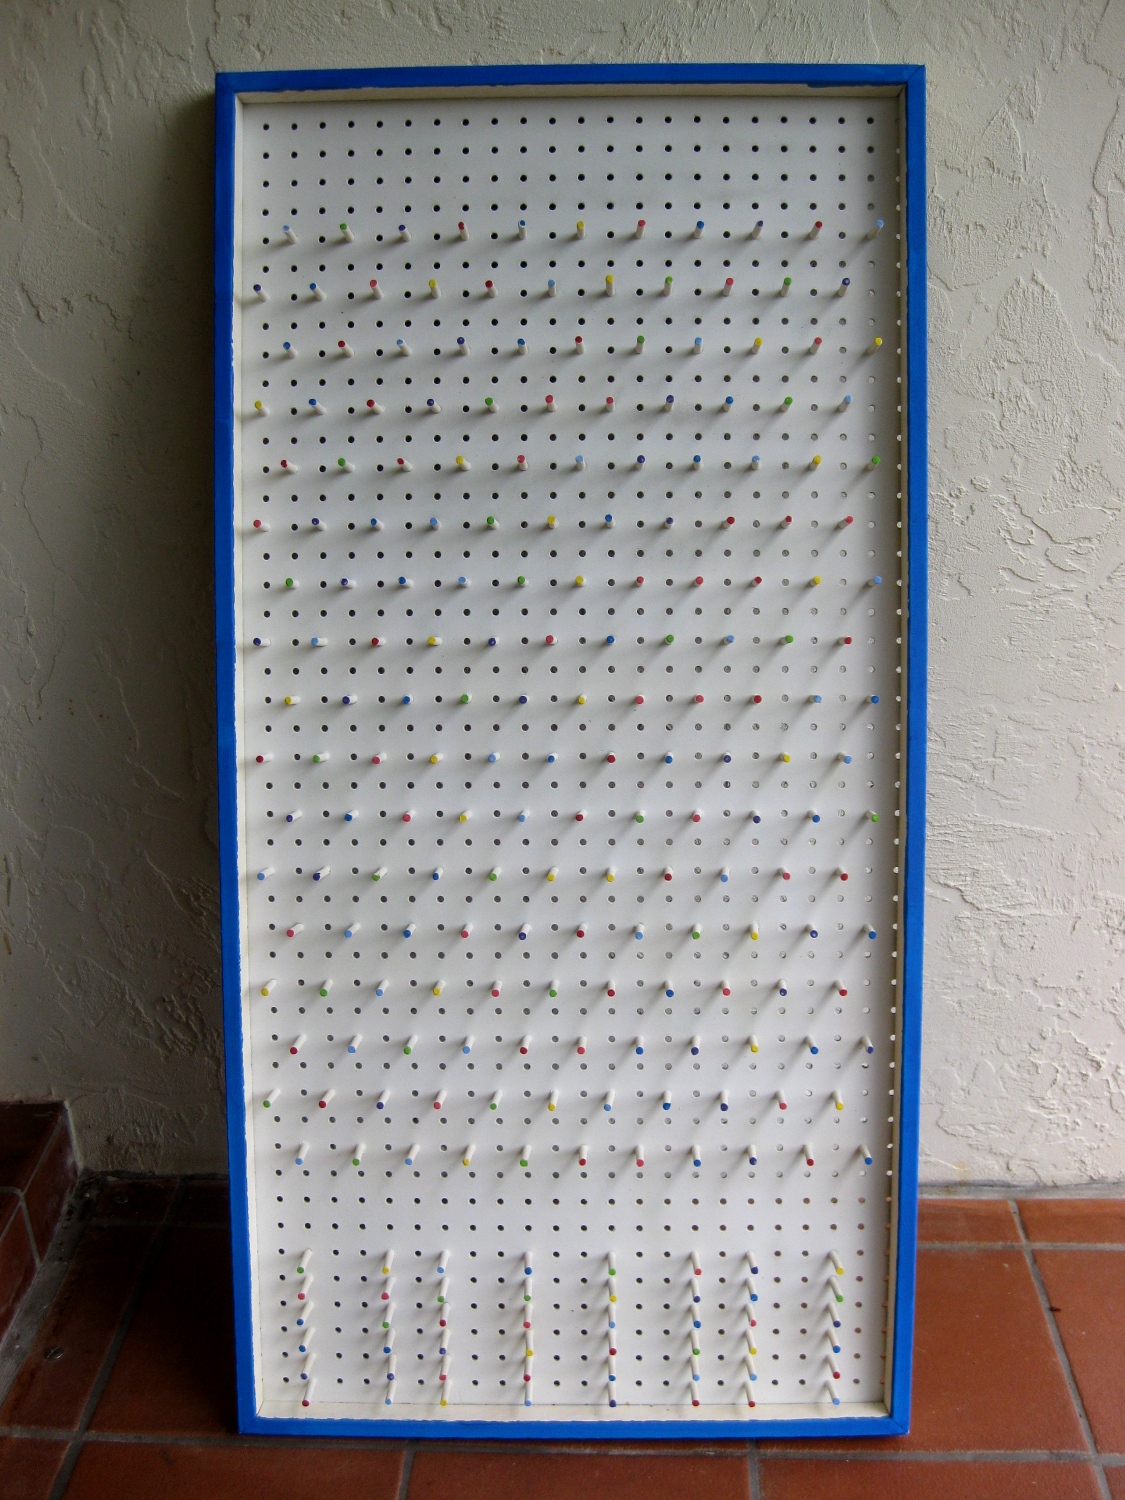 Super Plinko from the Roobet: Could it be Value To play?